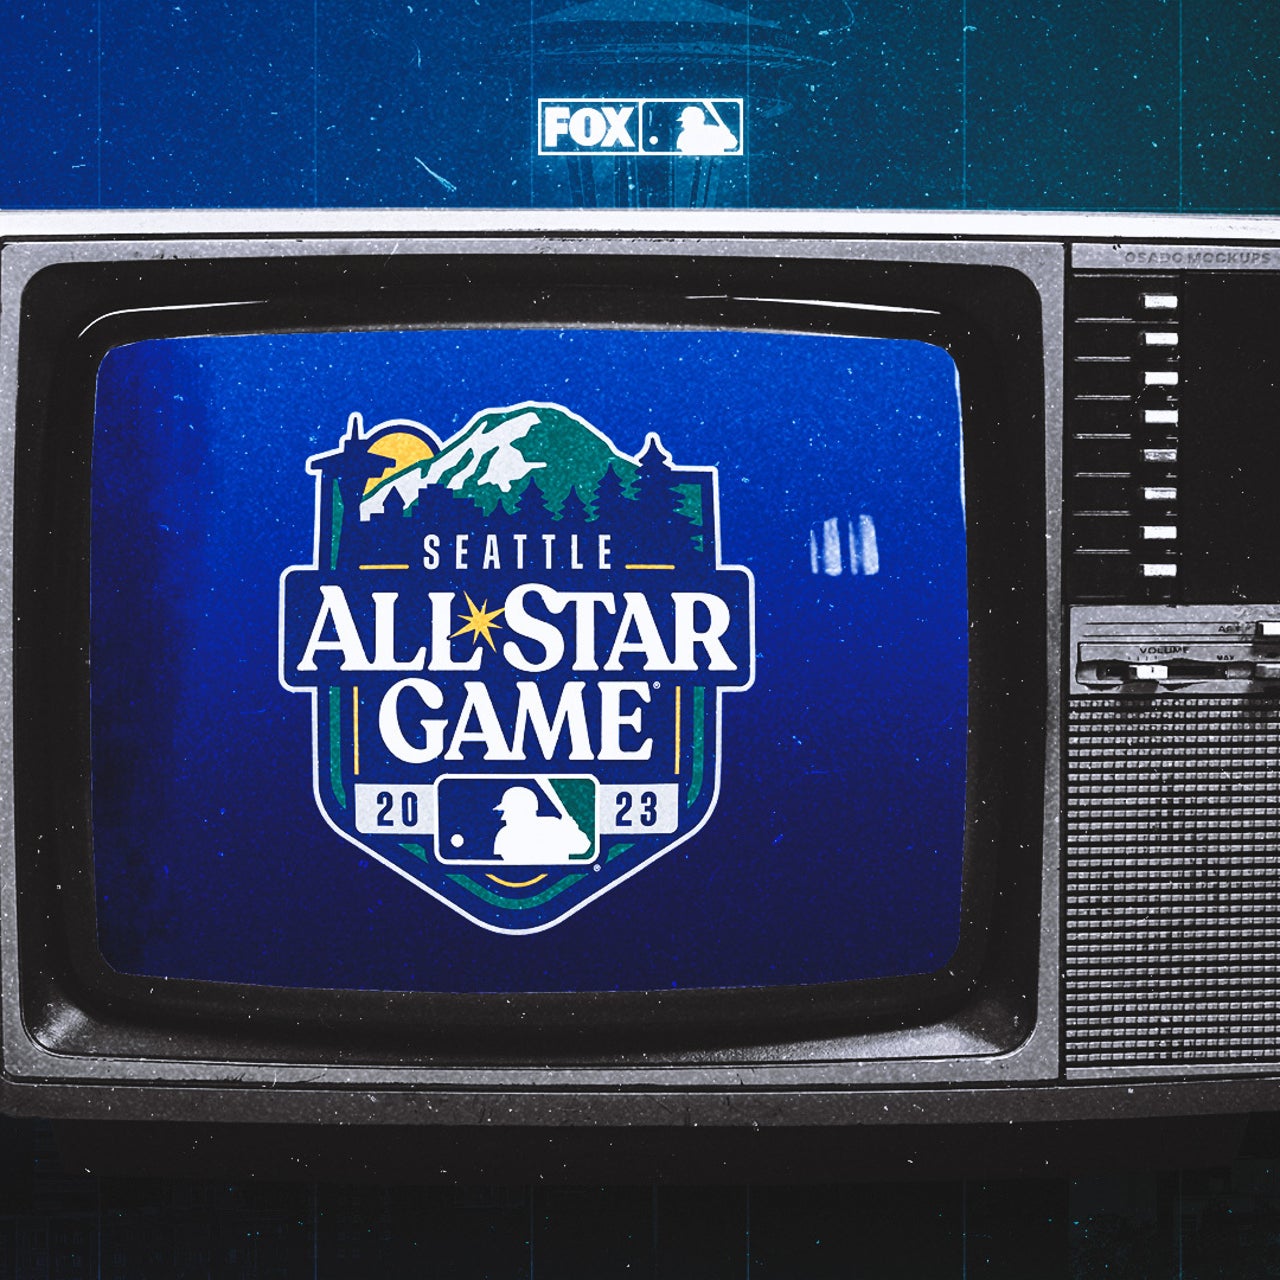 Classic Games: 2001 All-Star Game at T-Mobile Park